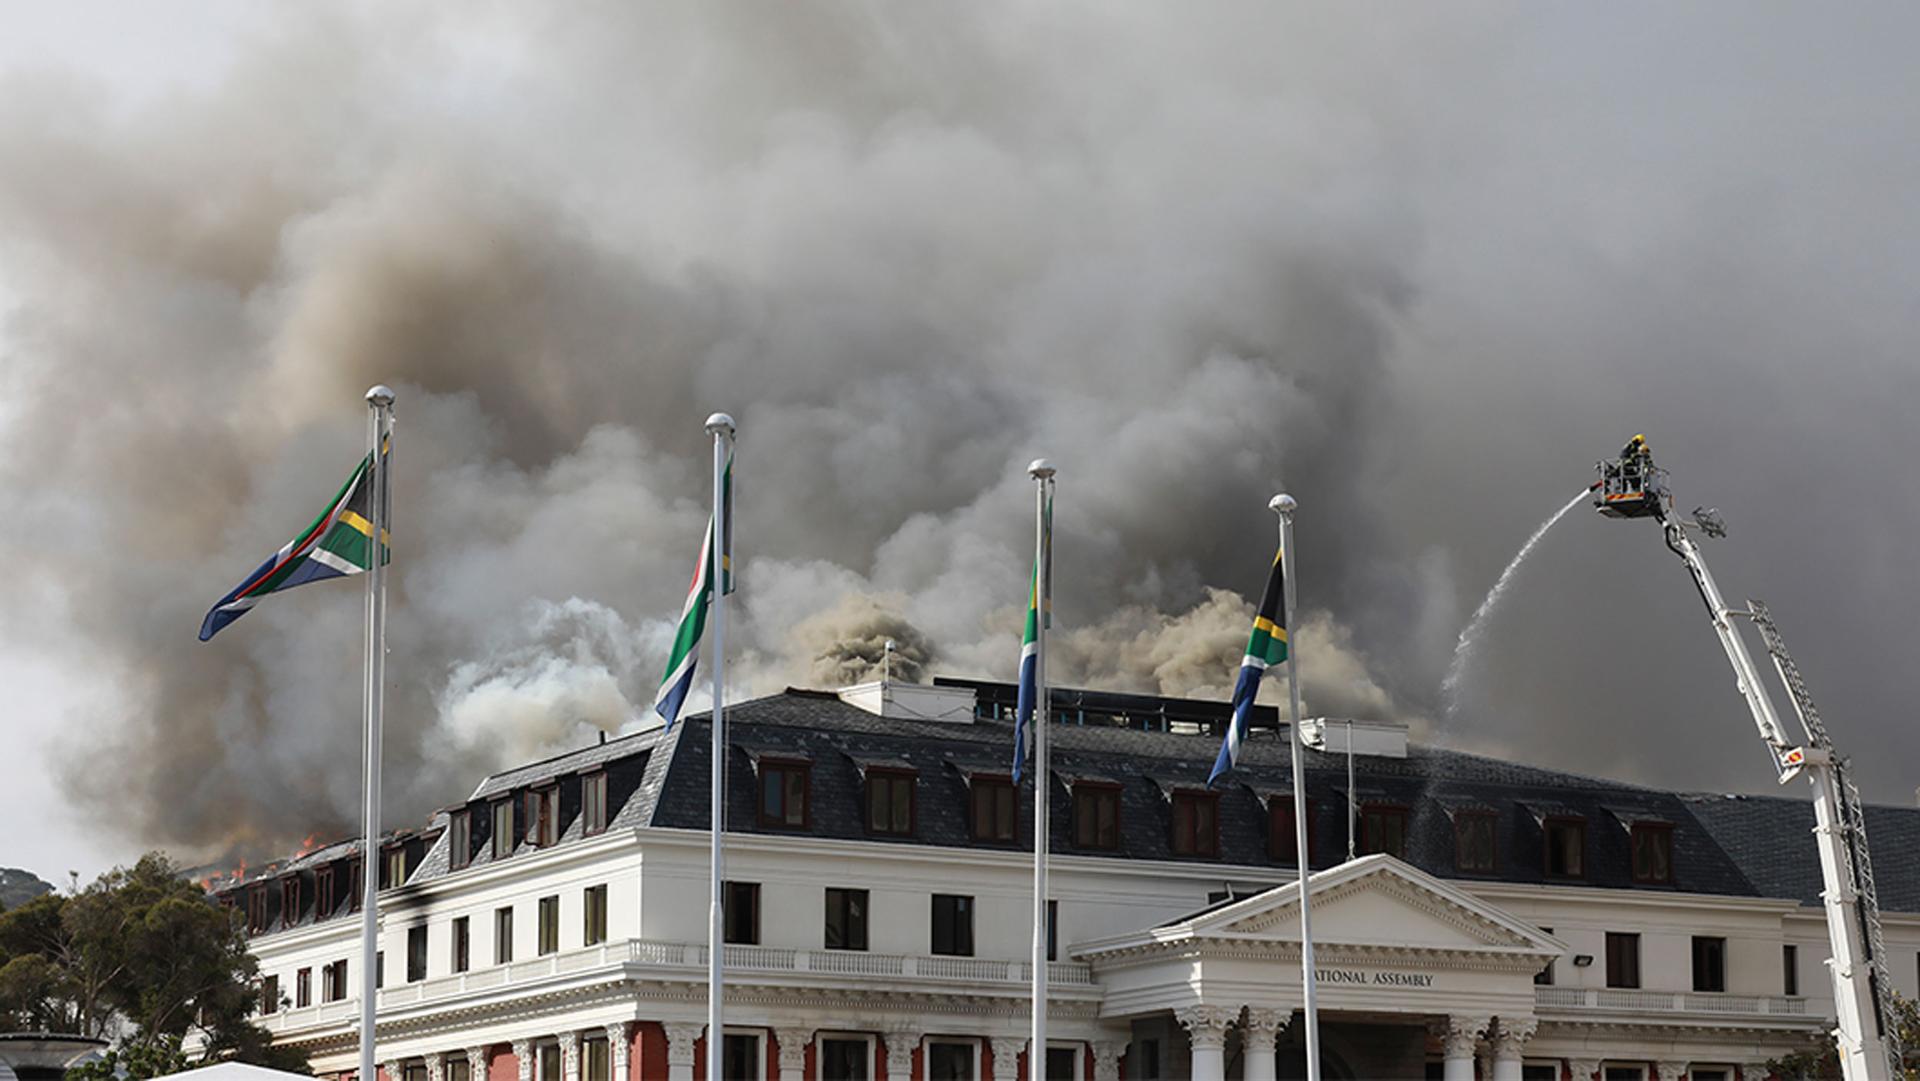 Smoke rises after fires re-ignited late afternoon from the Parliament in Cape Town, South Africa